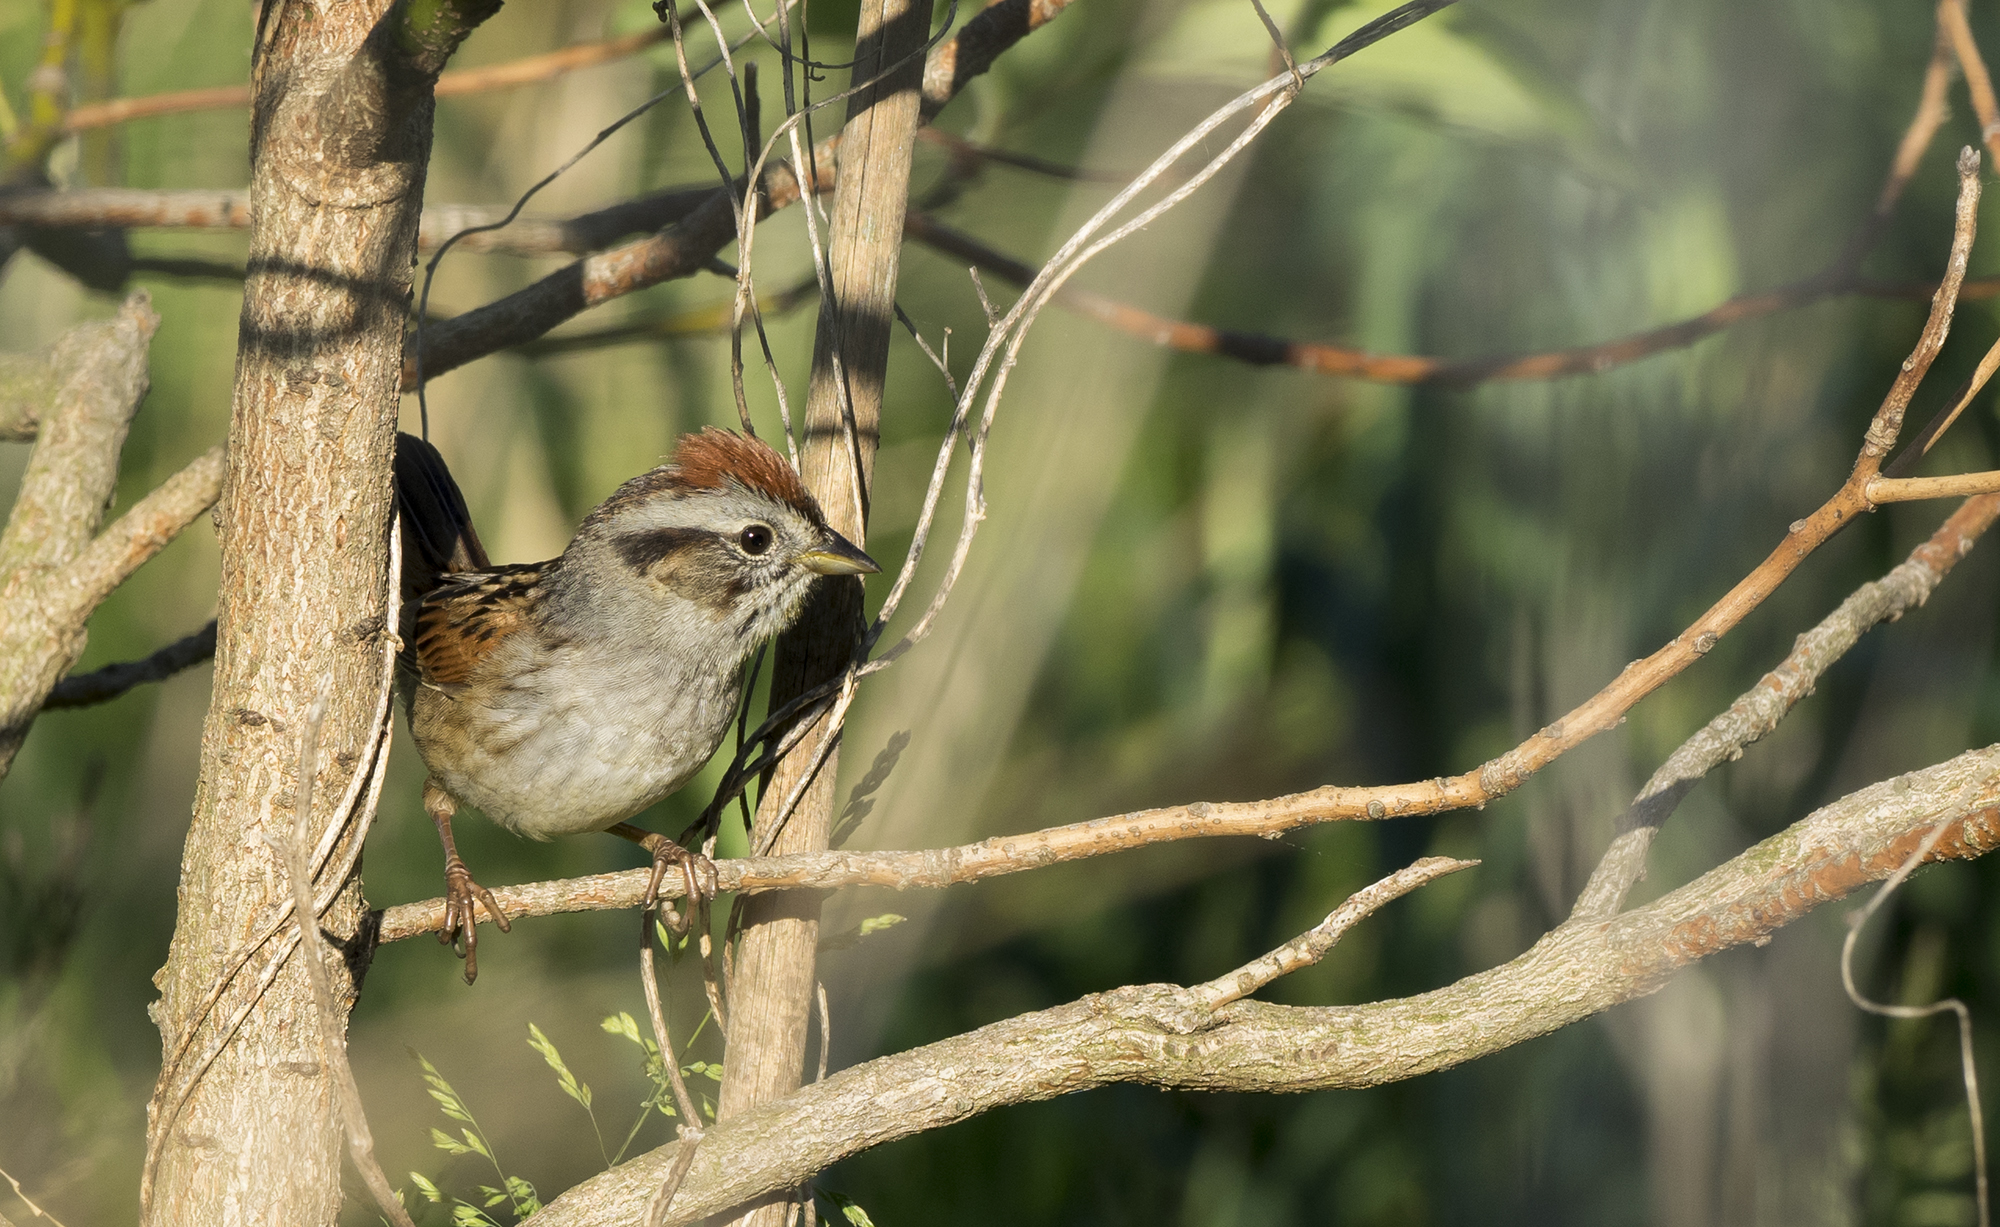 A swamp sparrow sitting on a branch